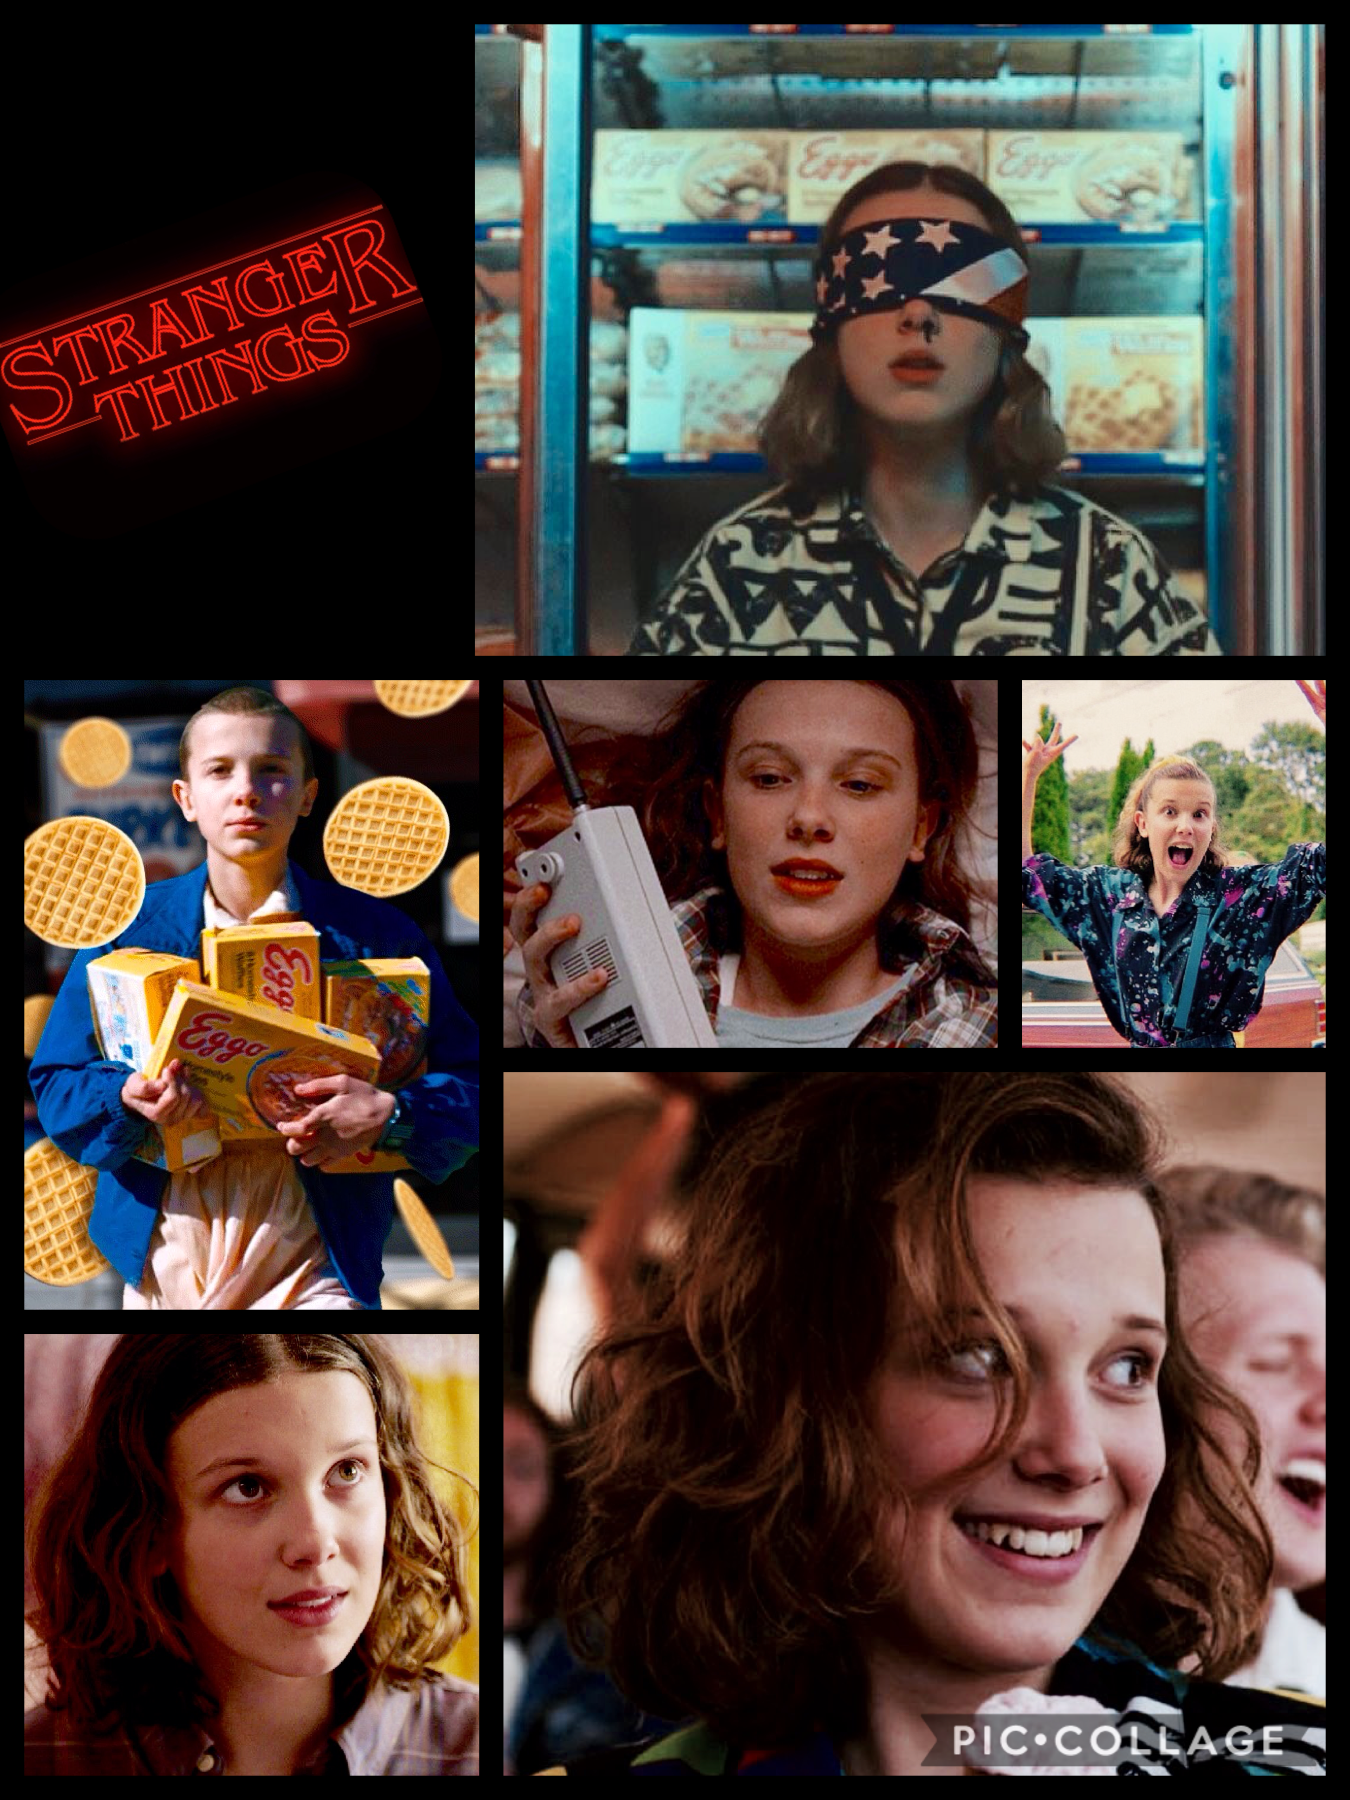 Eleven/Jane is my favorite character in Stranger Thing! I made this edit of all her photos. Hope you like it! 💕